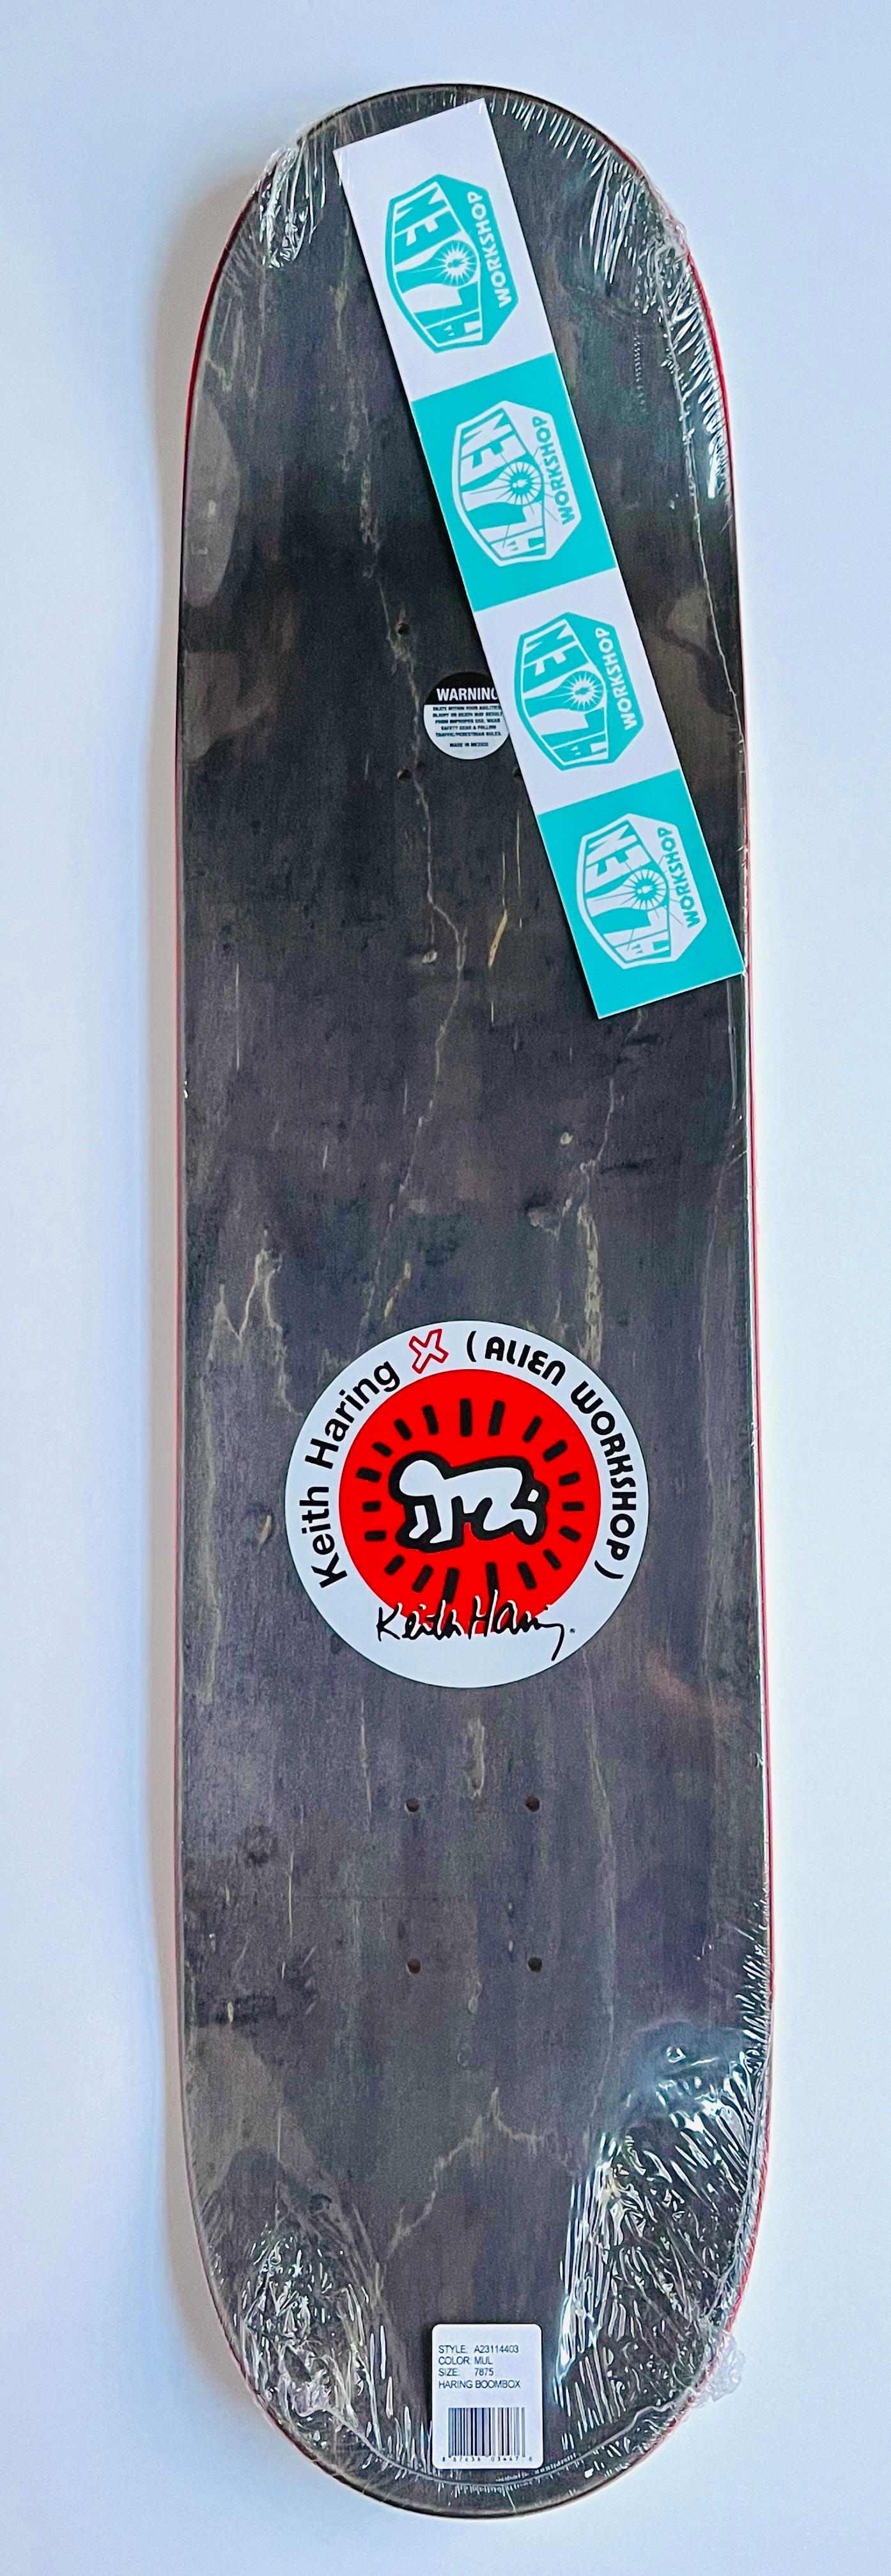 Keith Haring Skateboard deck 2012 (Keith Haring skate deck) For Sale 2